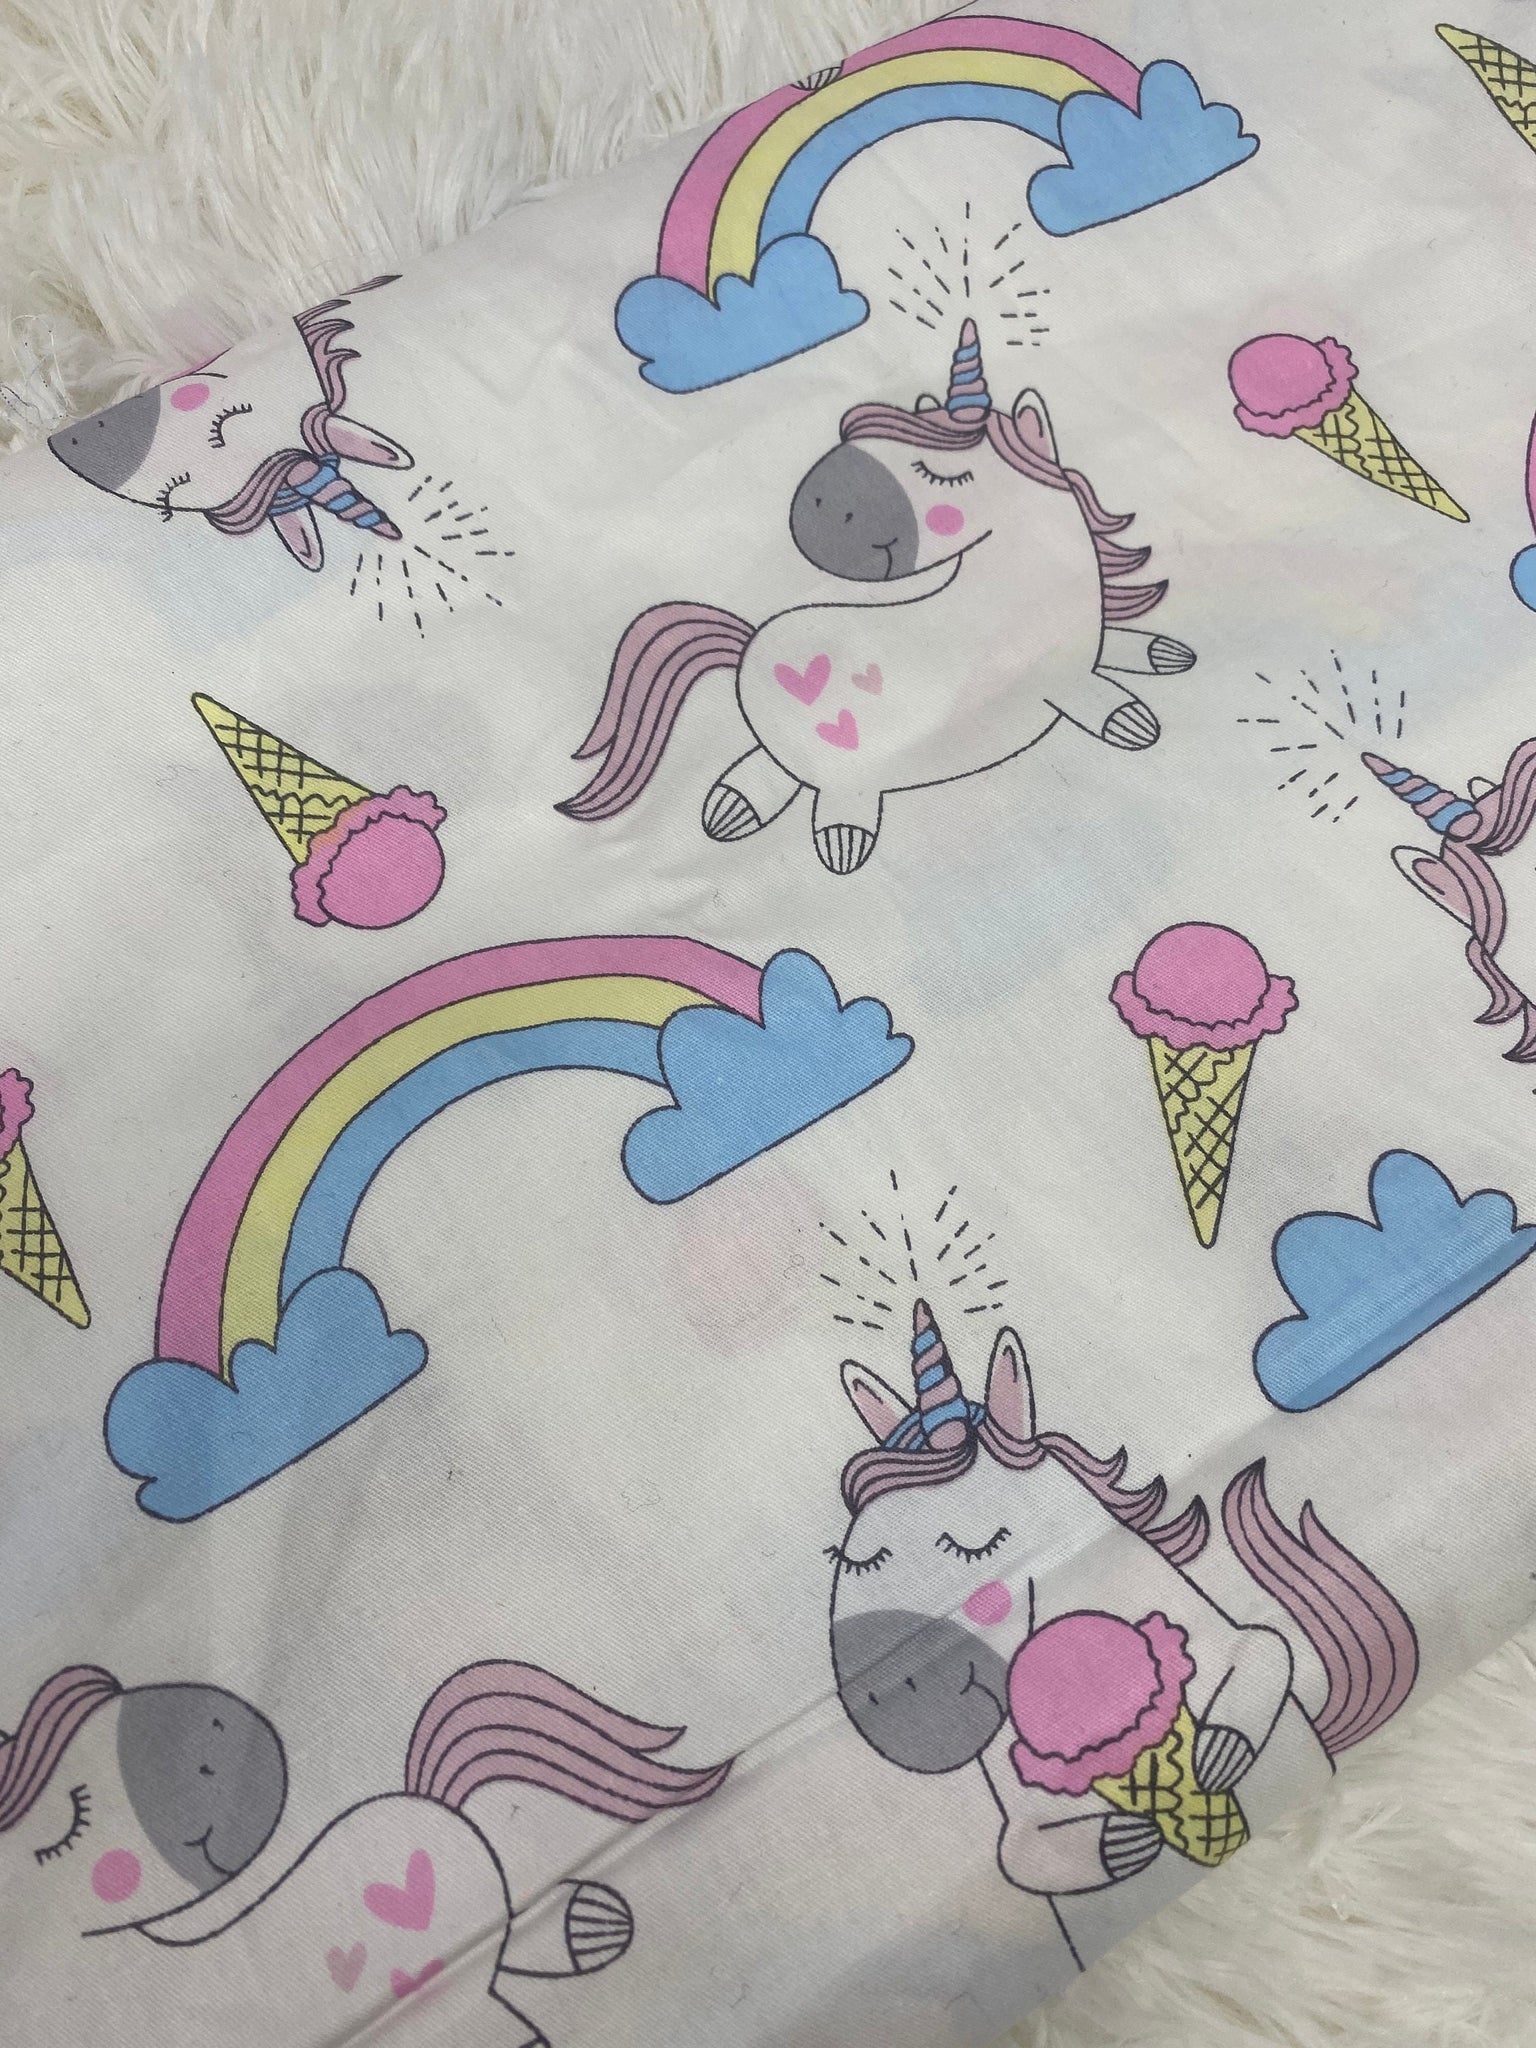 NEW, "Unicorn Ice Cream Dreams", 100%Ribbed Cotton Fabric, Boutique Fabric, Custom Made Kids Fabric for Masks,Accessories, Bedding Etc, 1 Yd